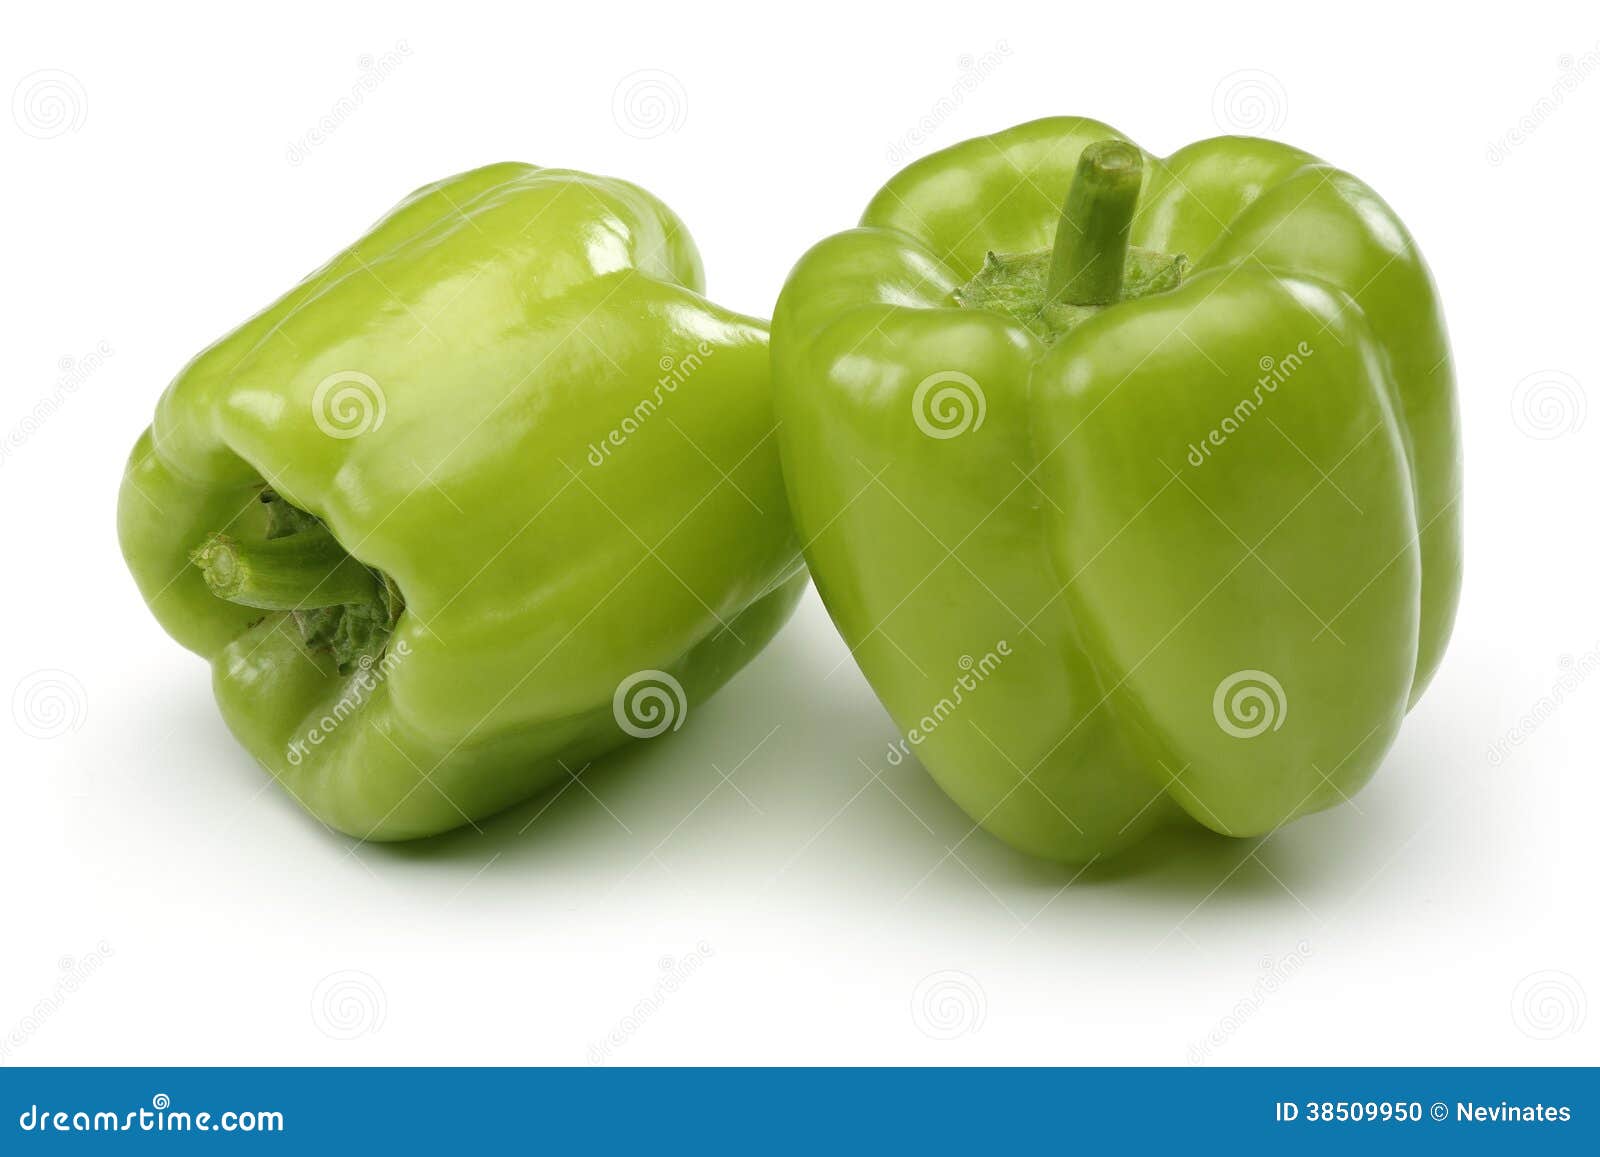 two bell peppers